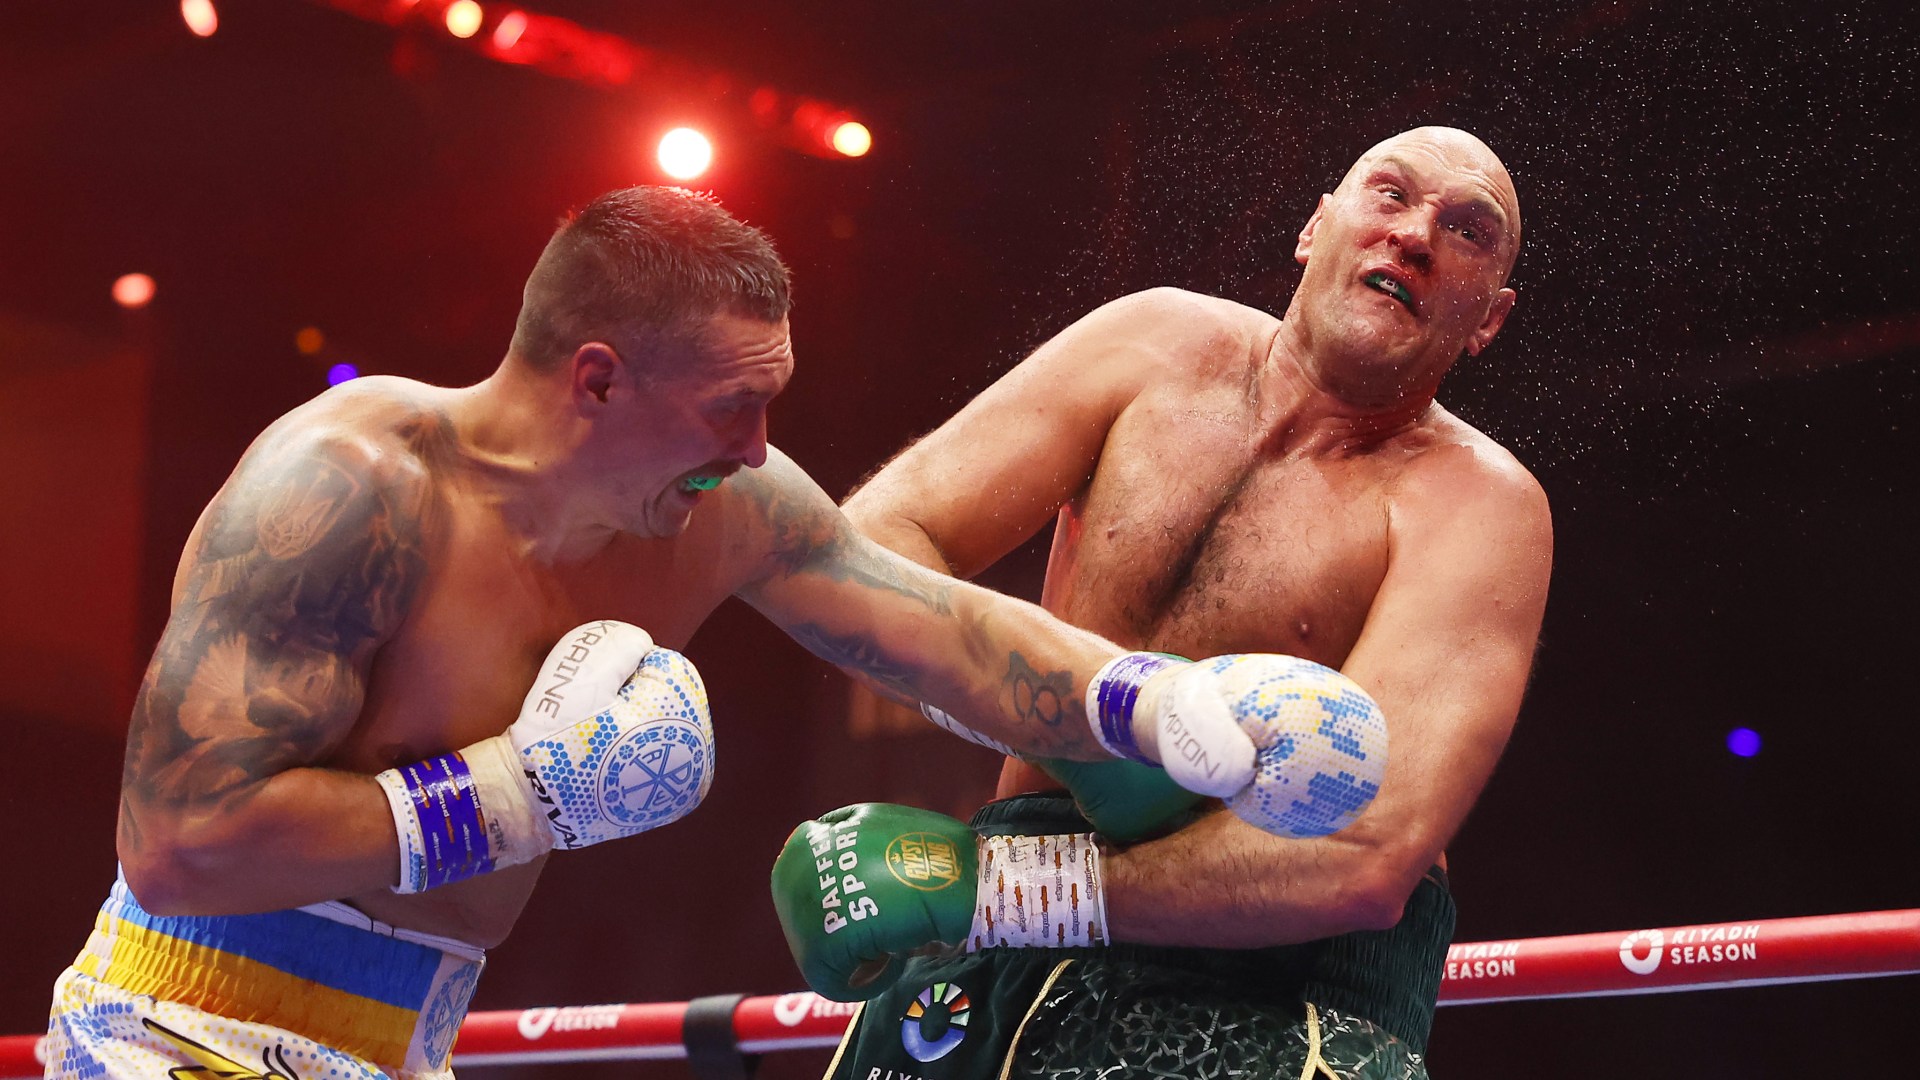 Oleksandr Usyk tipped for shock career change after ‘retiring’ Tyson Fury in rematch due to lack of opponents [Video]